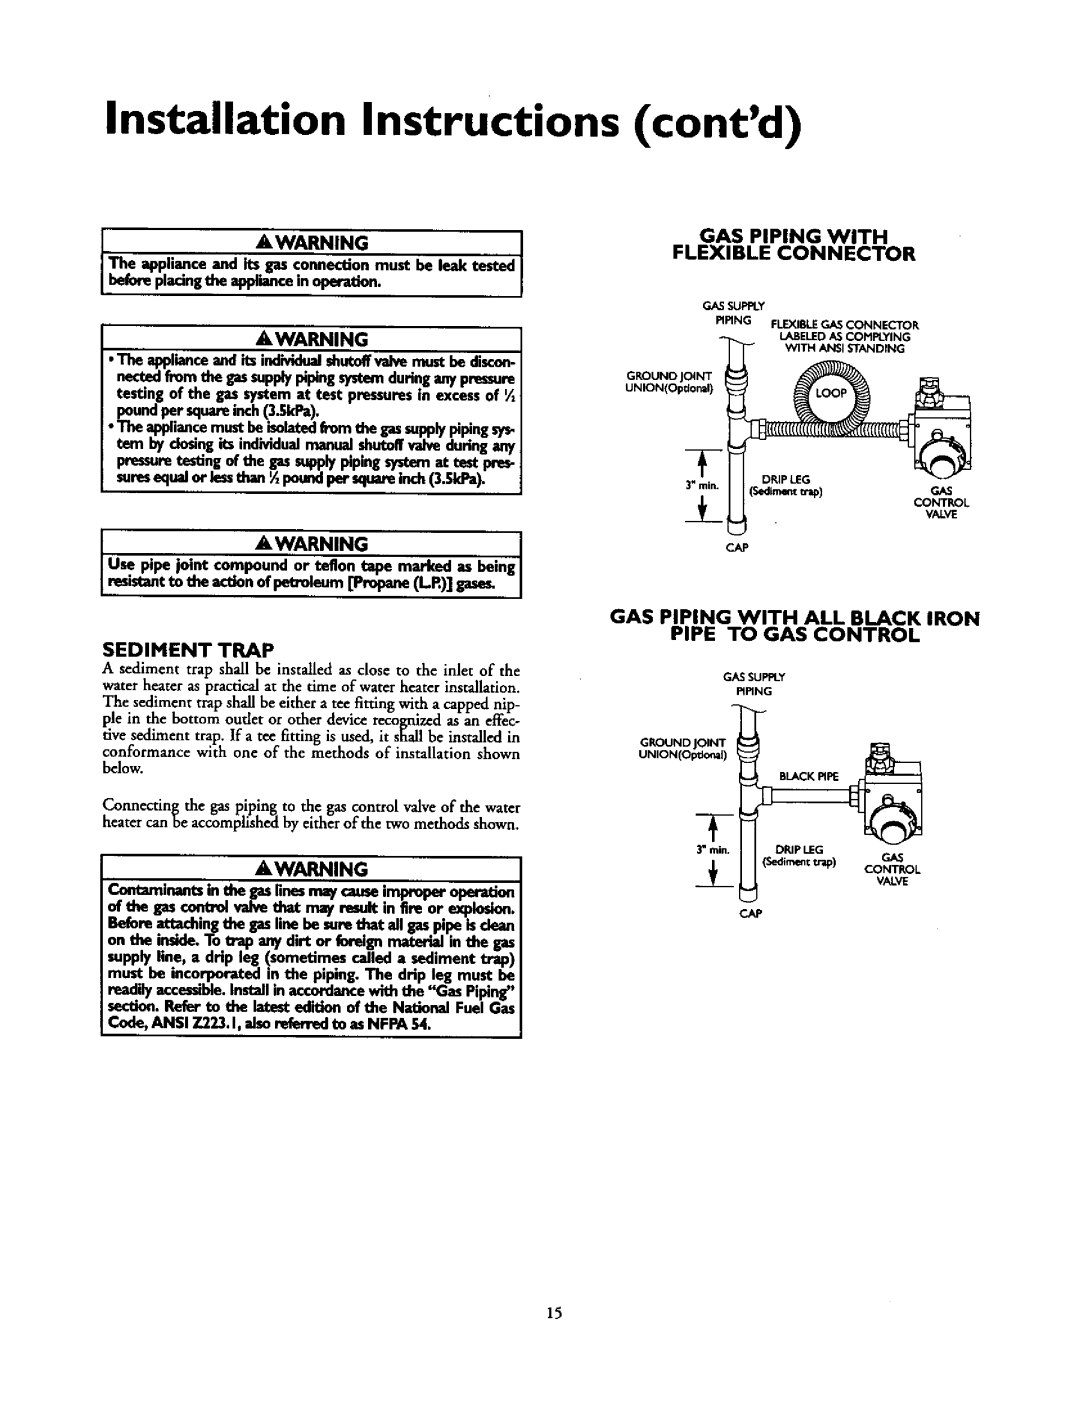 Kenmore 153.336351 Installation Instructions, contd, Awarning, Gas Piping With Flexible Connector, AWARNING1, h, WARNING 